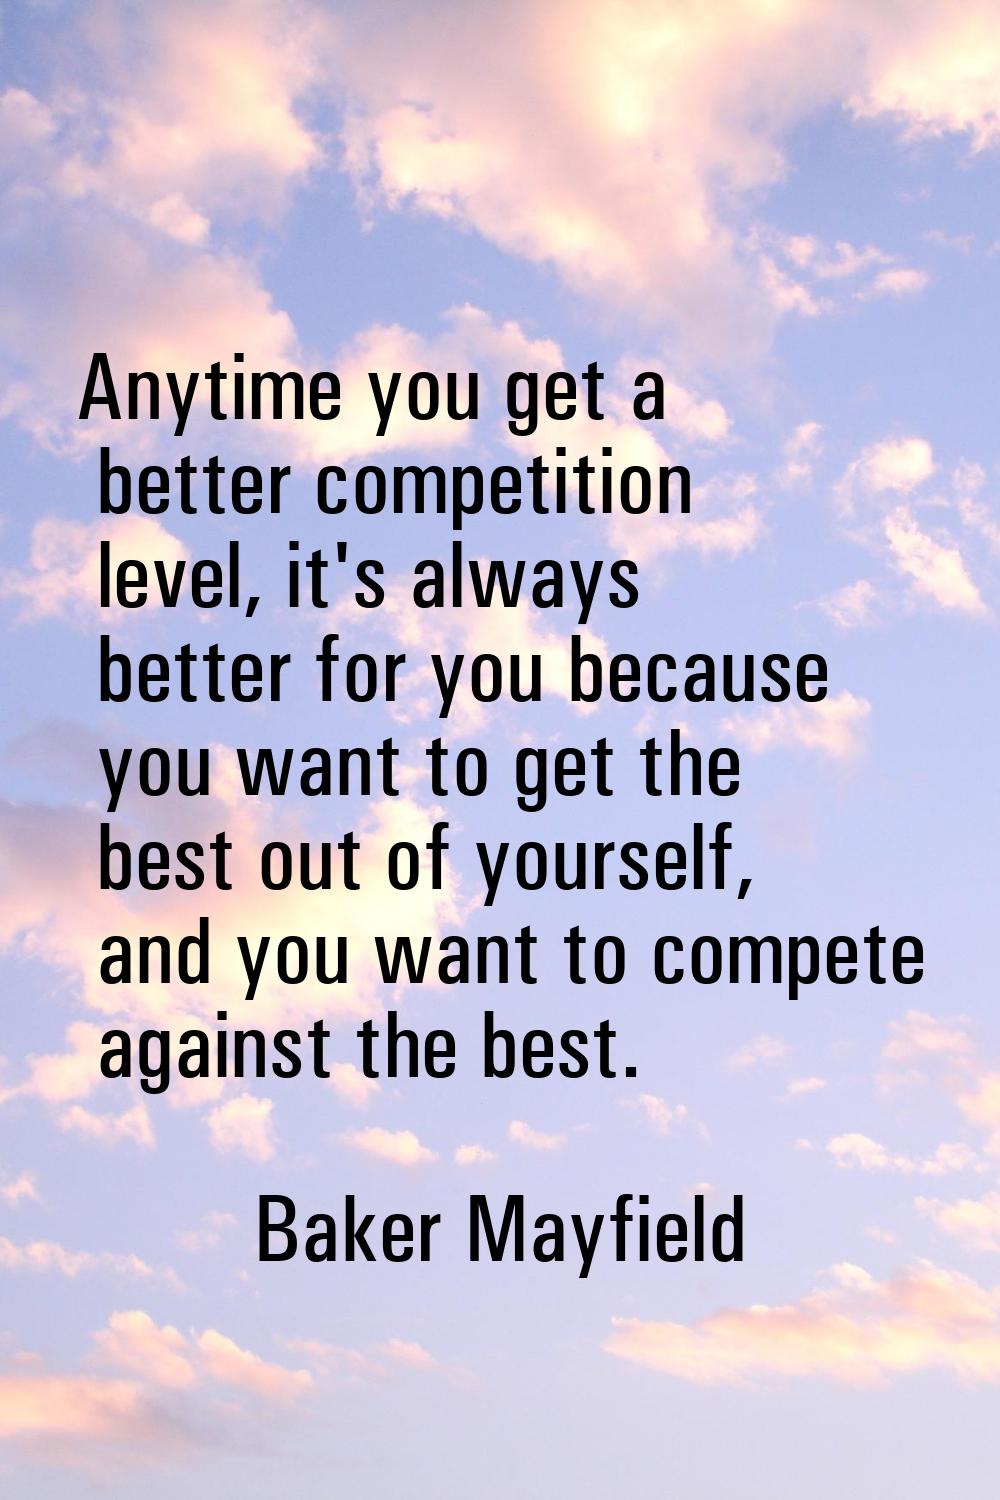 Anytime you get a better competition level, it's always better for you because you want to get the 